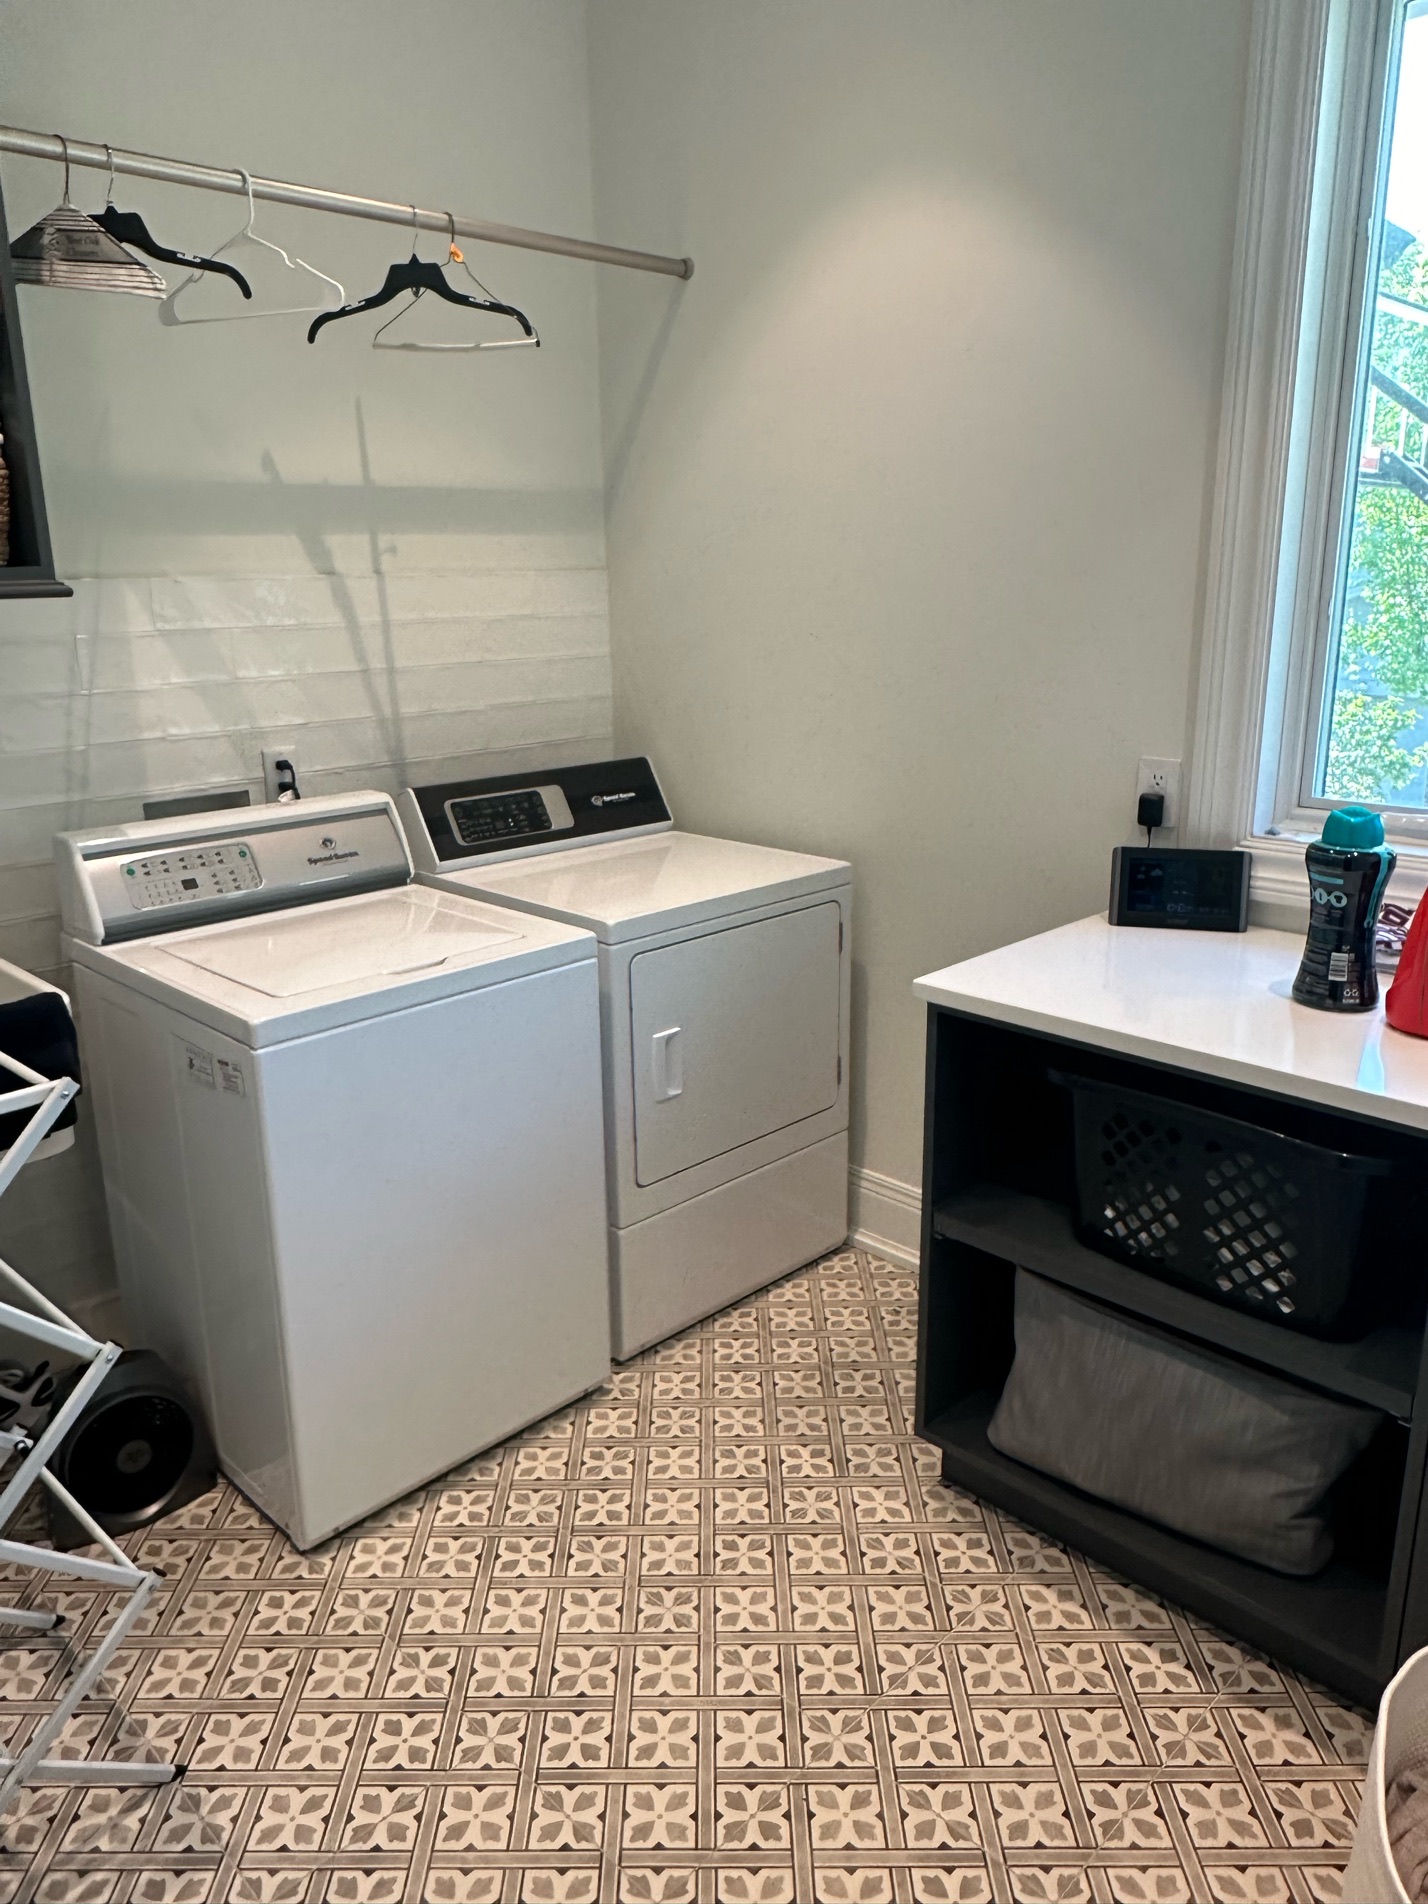 Clean and organized residential laundry room